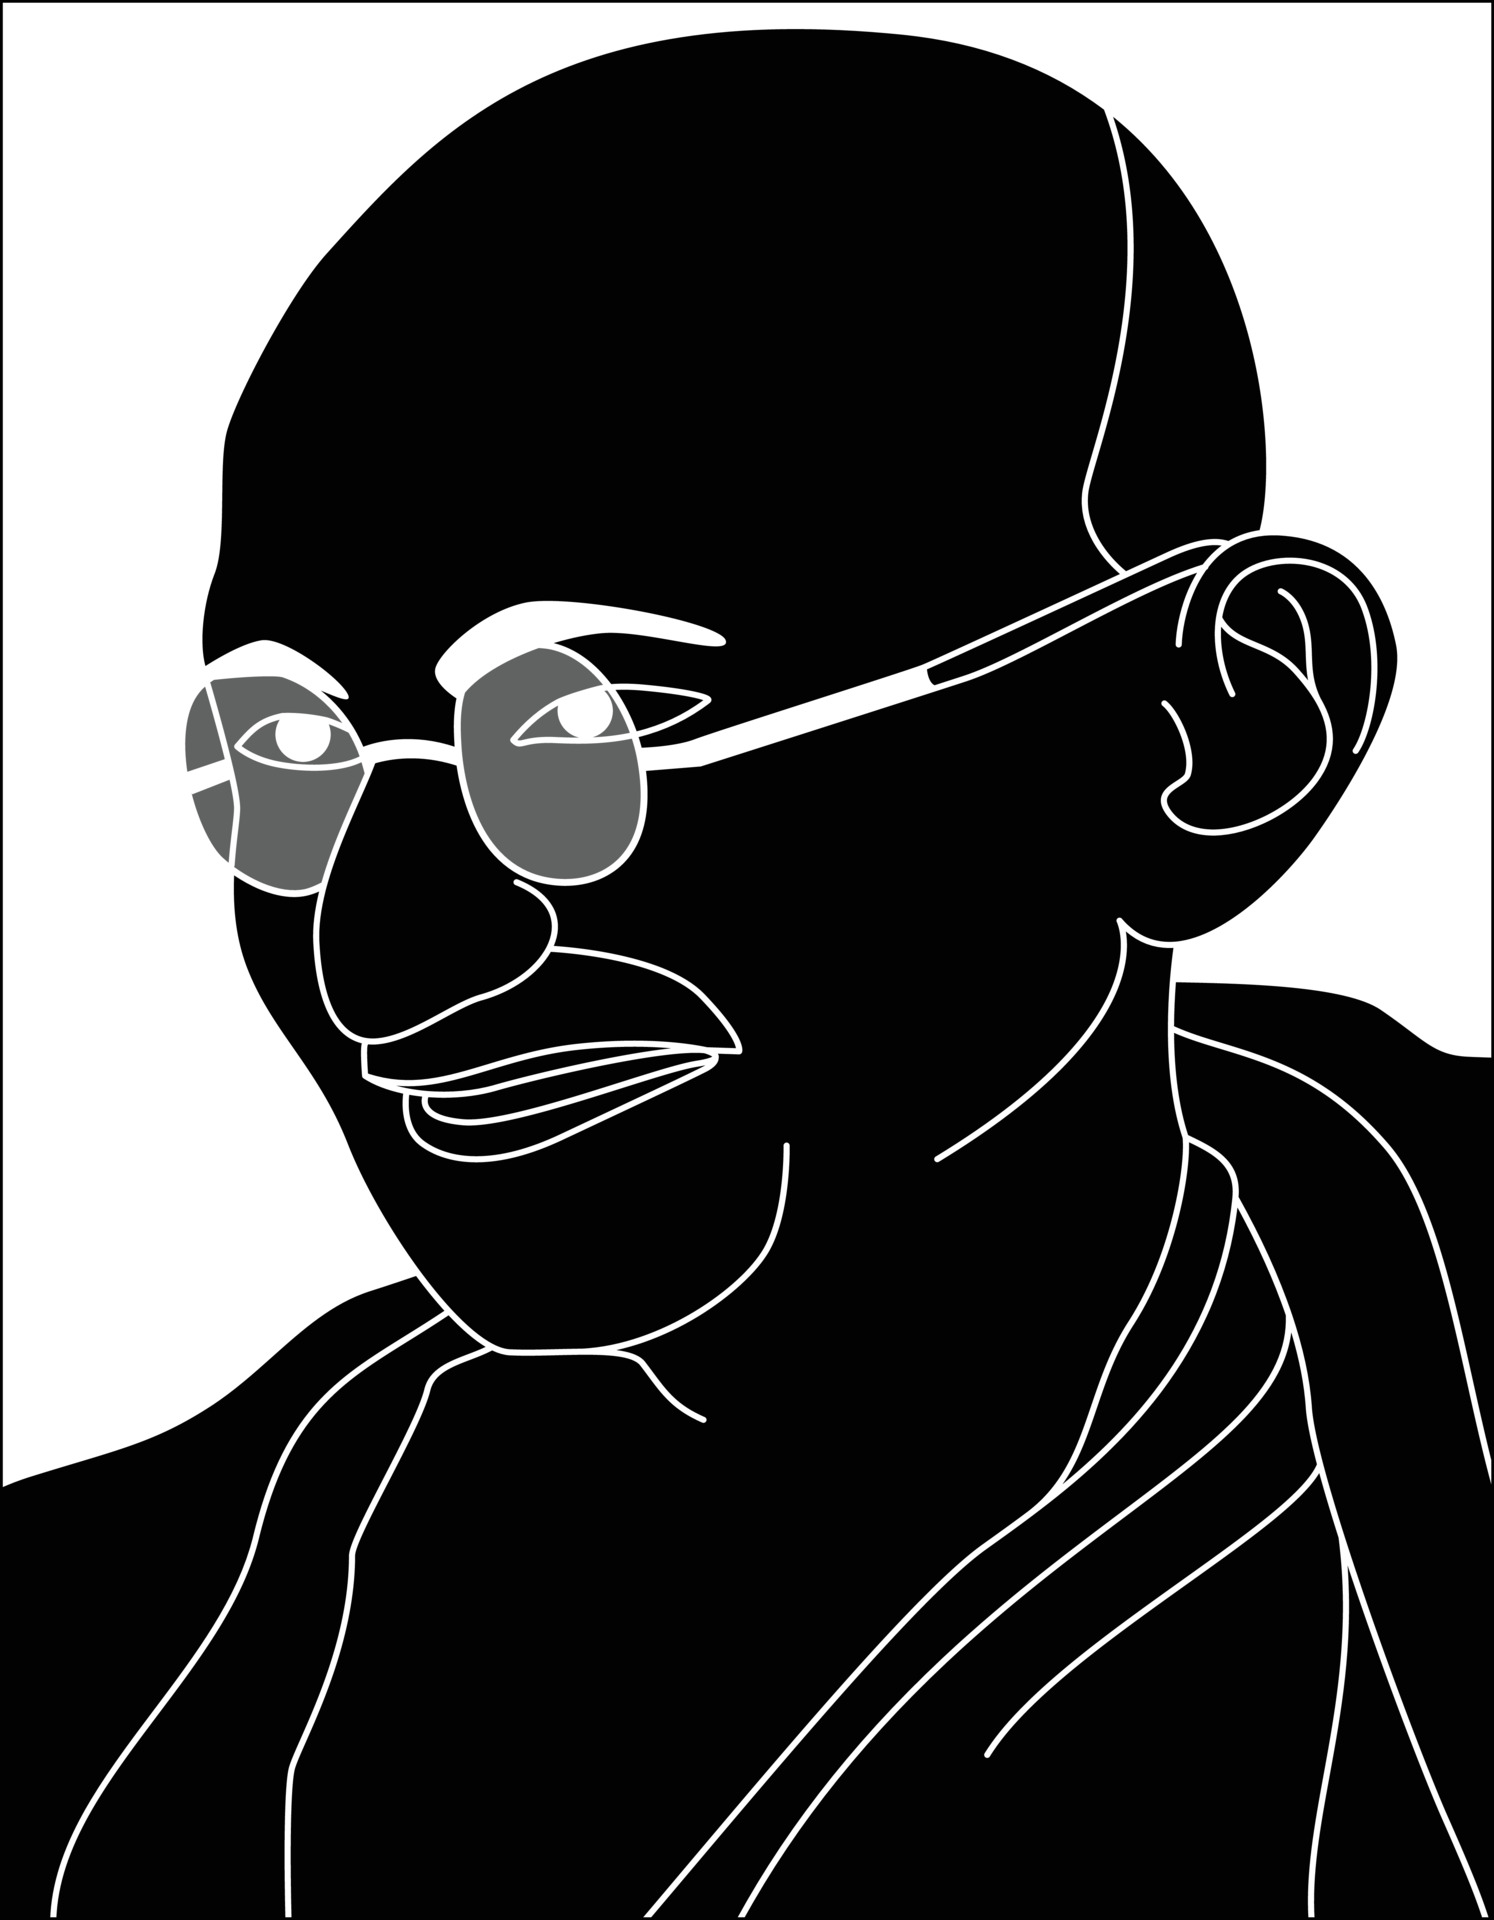 Mahatma Gandhi G  Draw on photos Pencil sketch images Poster drawing